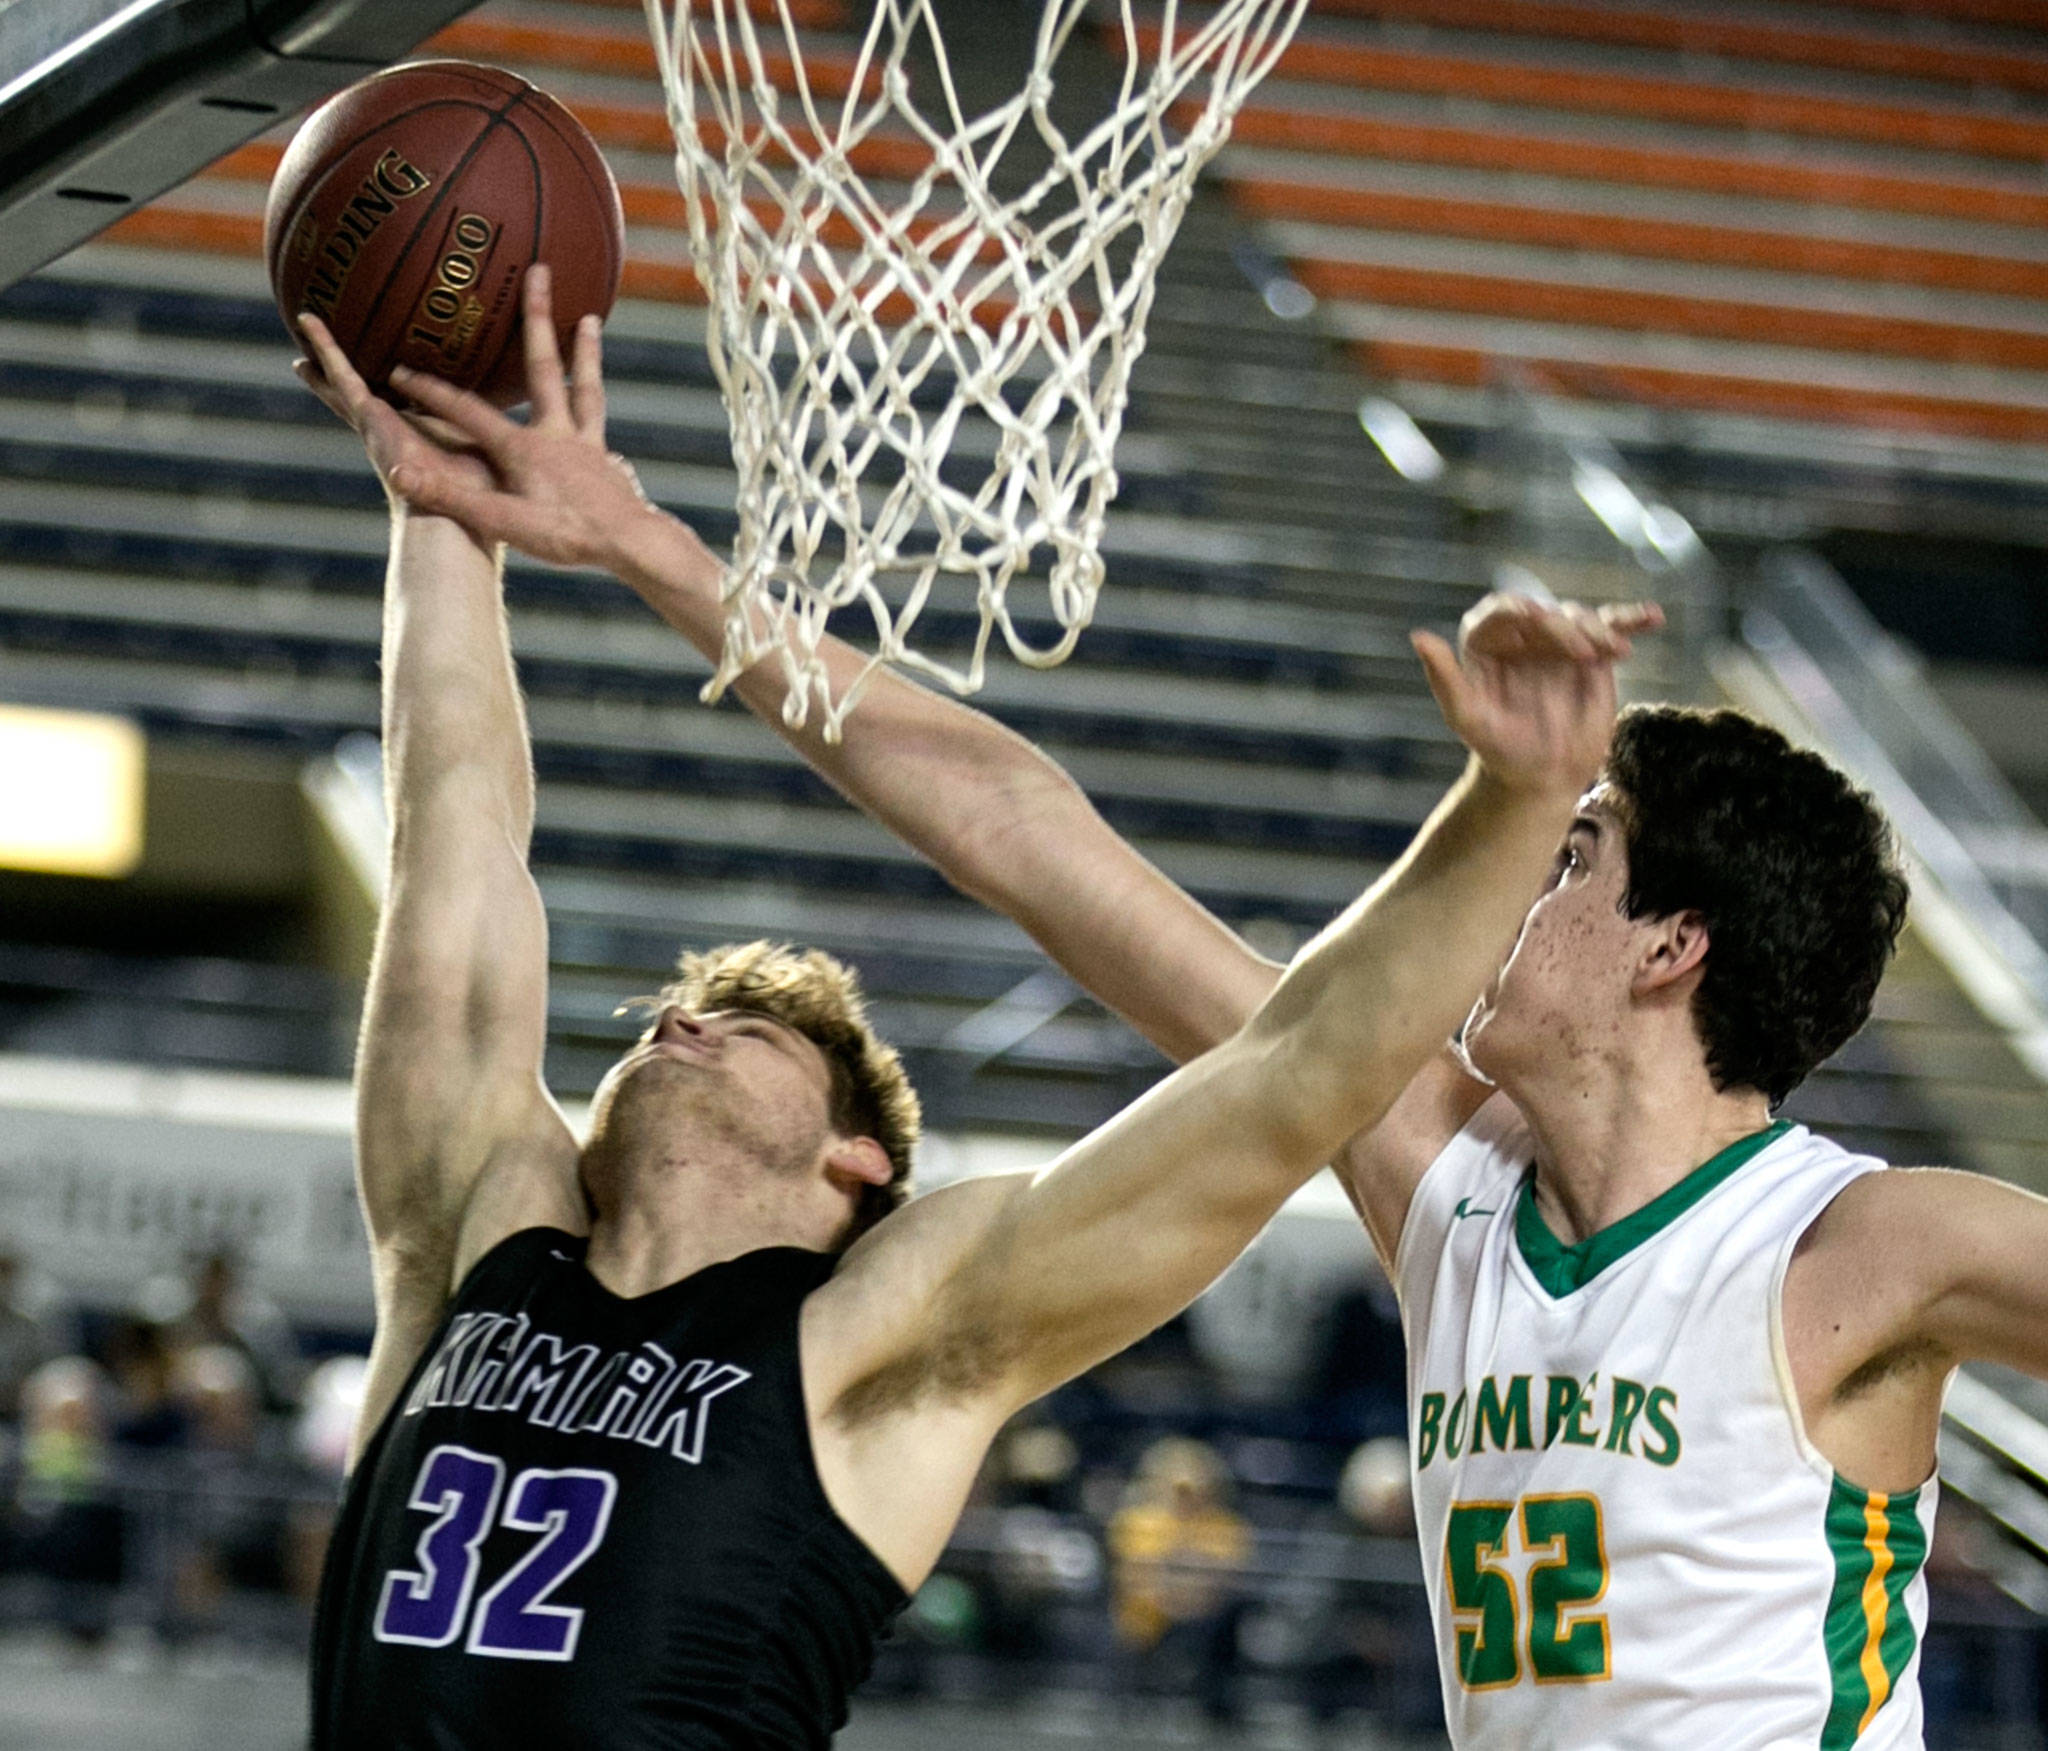 Kamiak’s Braden Leary has his shot blocked by Richland’s Riley Sorn during a 4A boys Hardwood Classic game on March 1, 2018, at the Tacoma Dome. (Kevin Clark / The Herald)